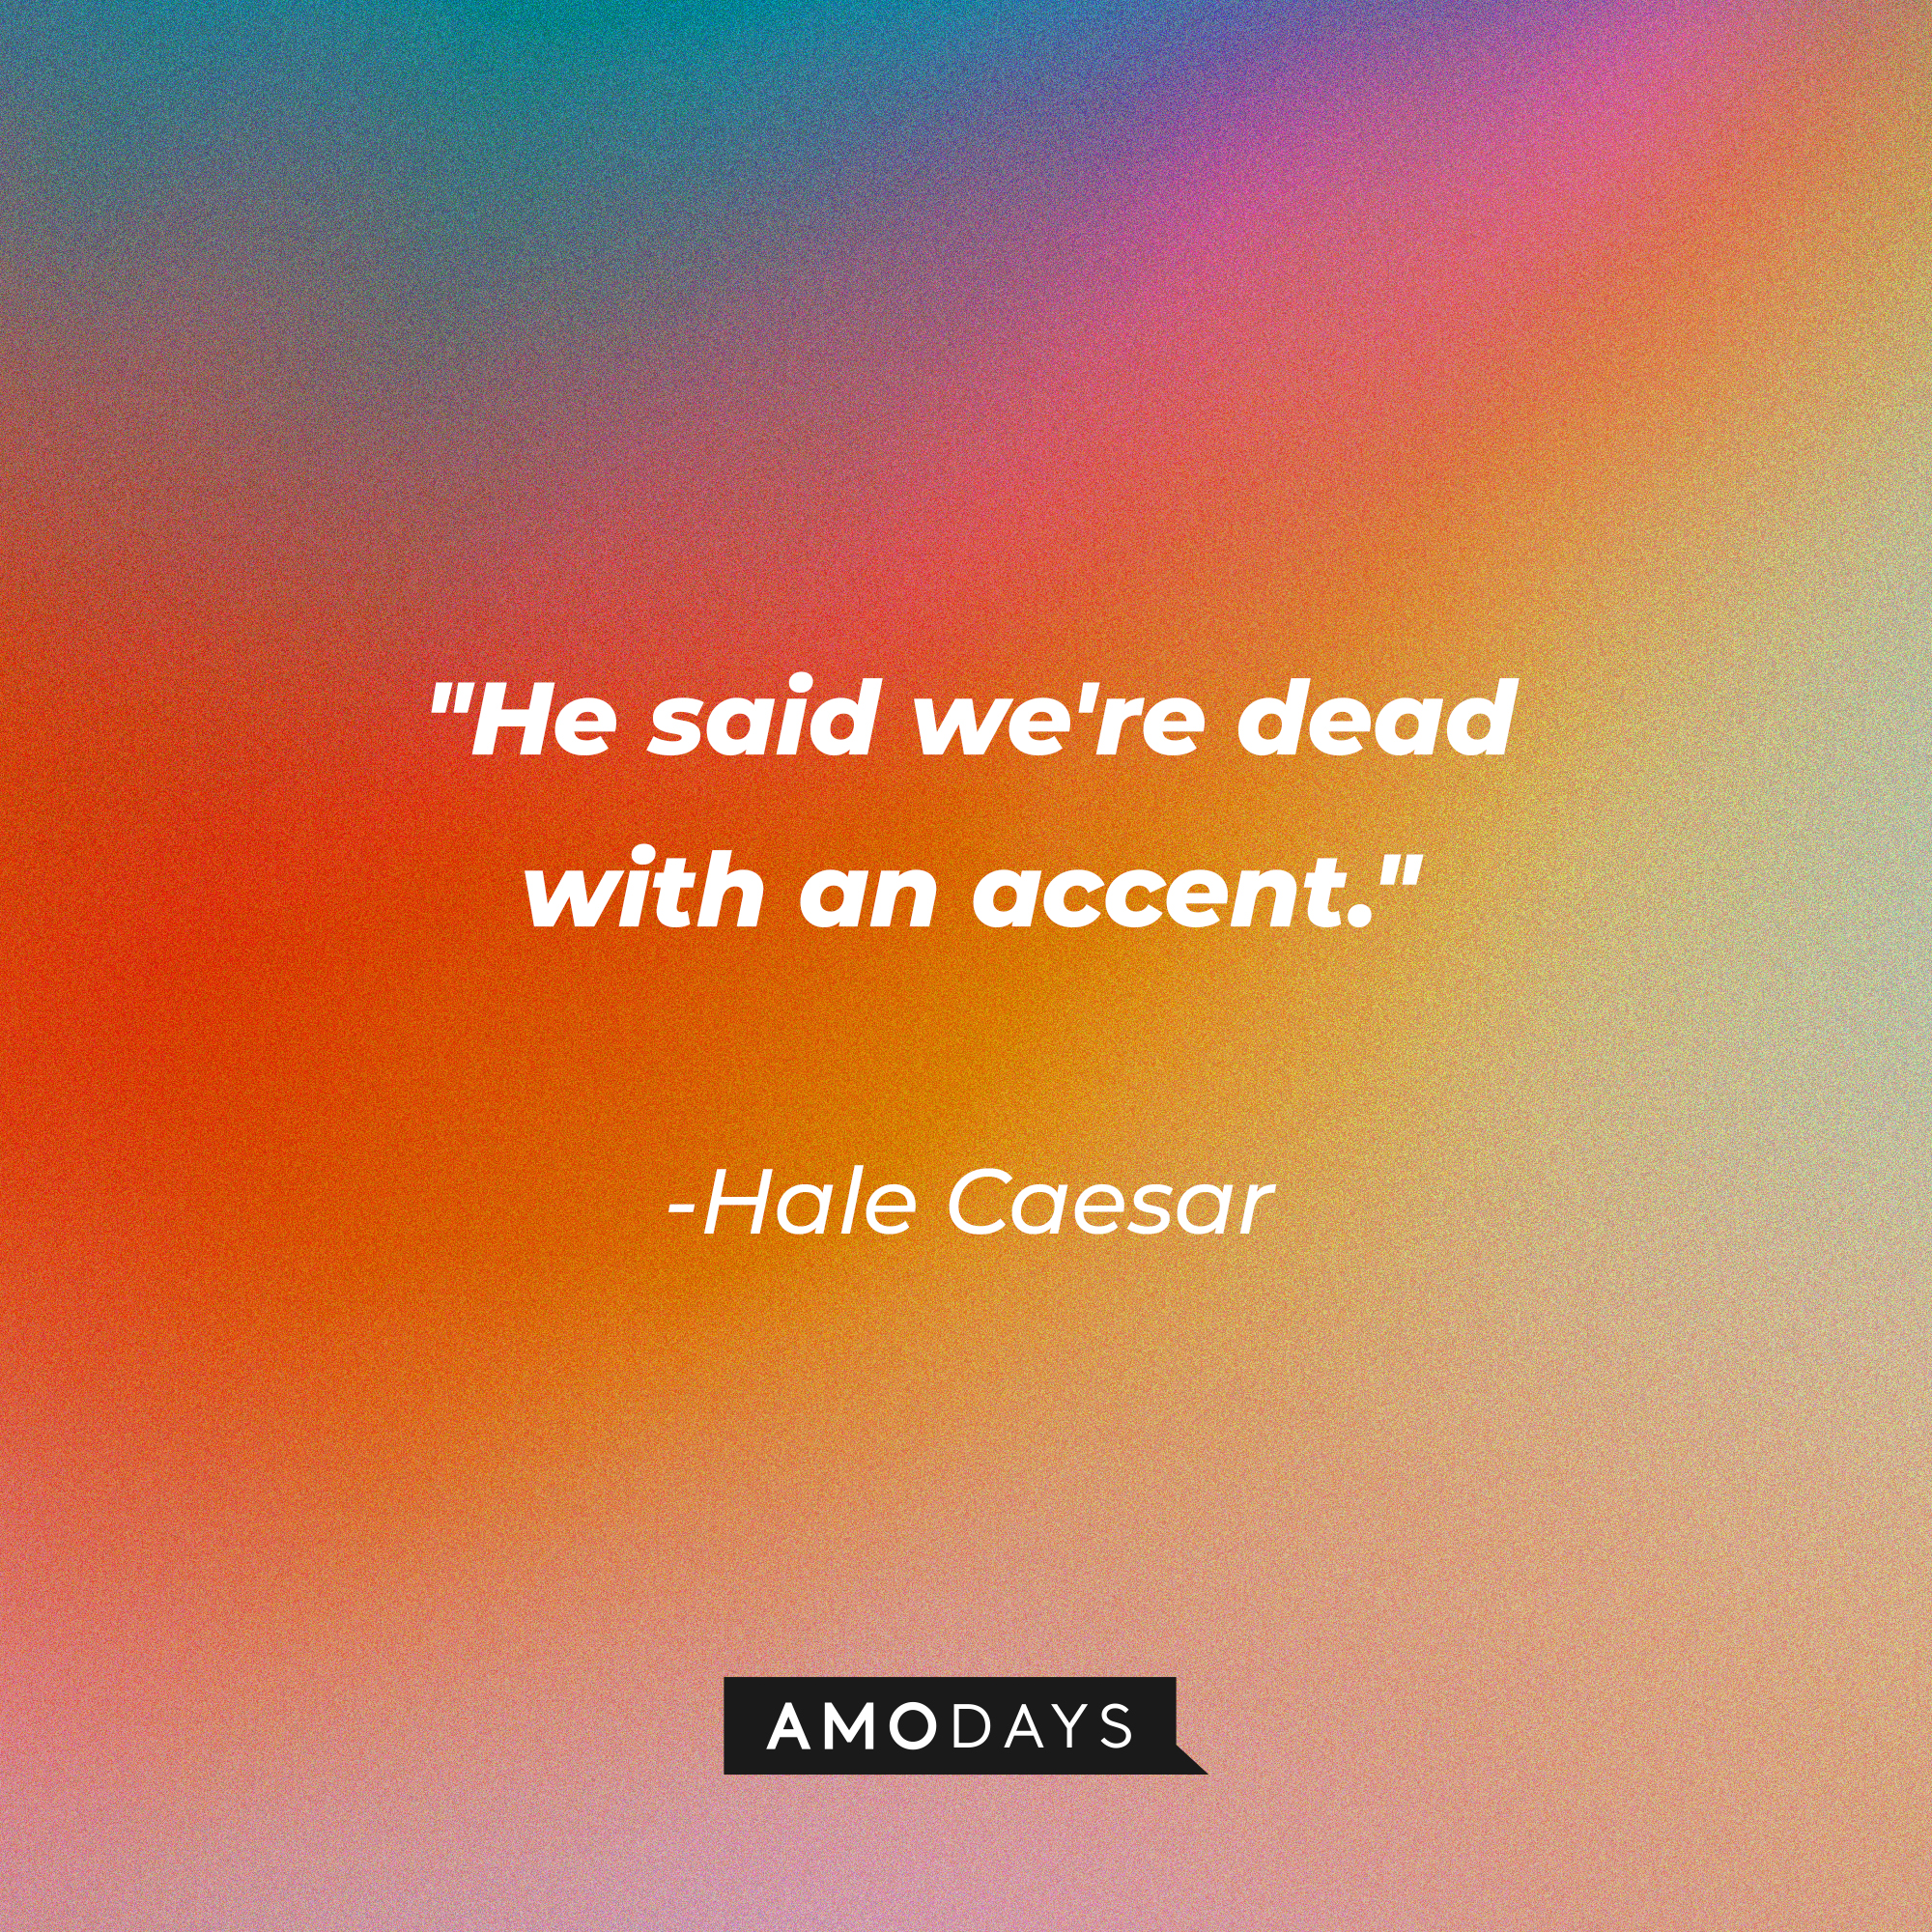 Hale Caesar’s quote: "He said we're dead with an accent." | Source: AmoDays